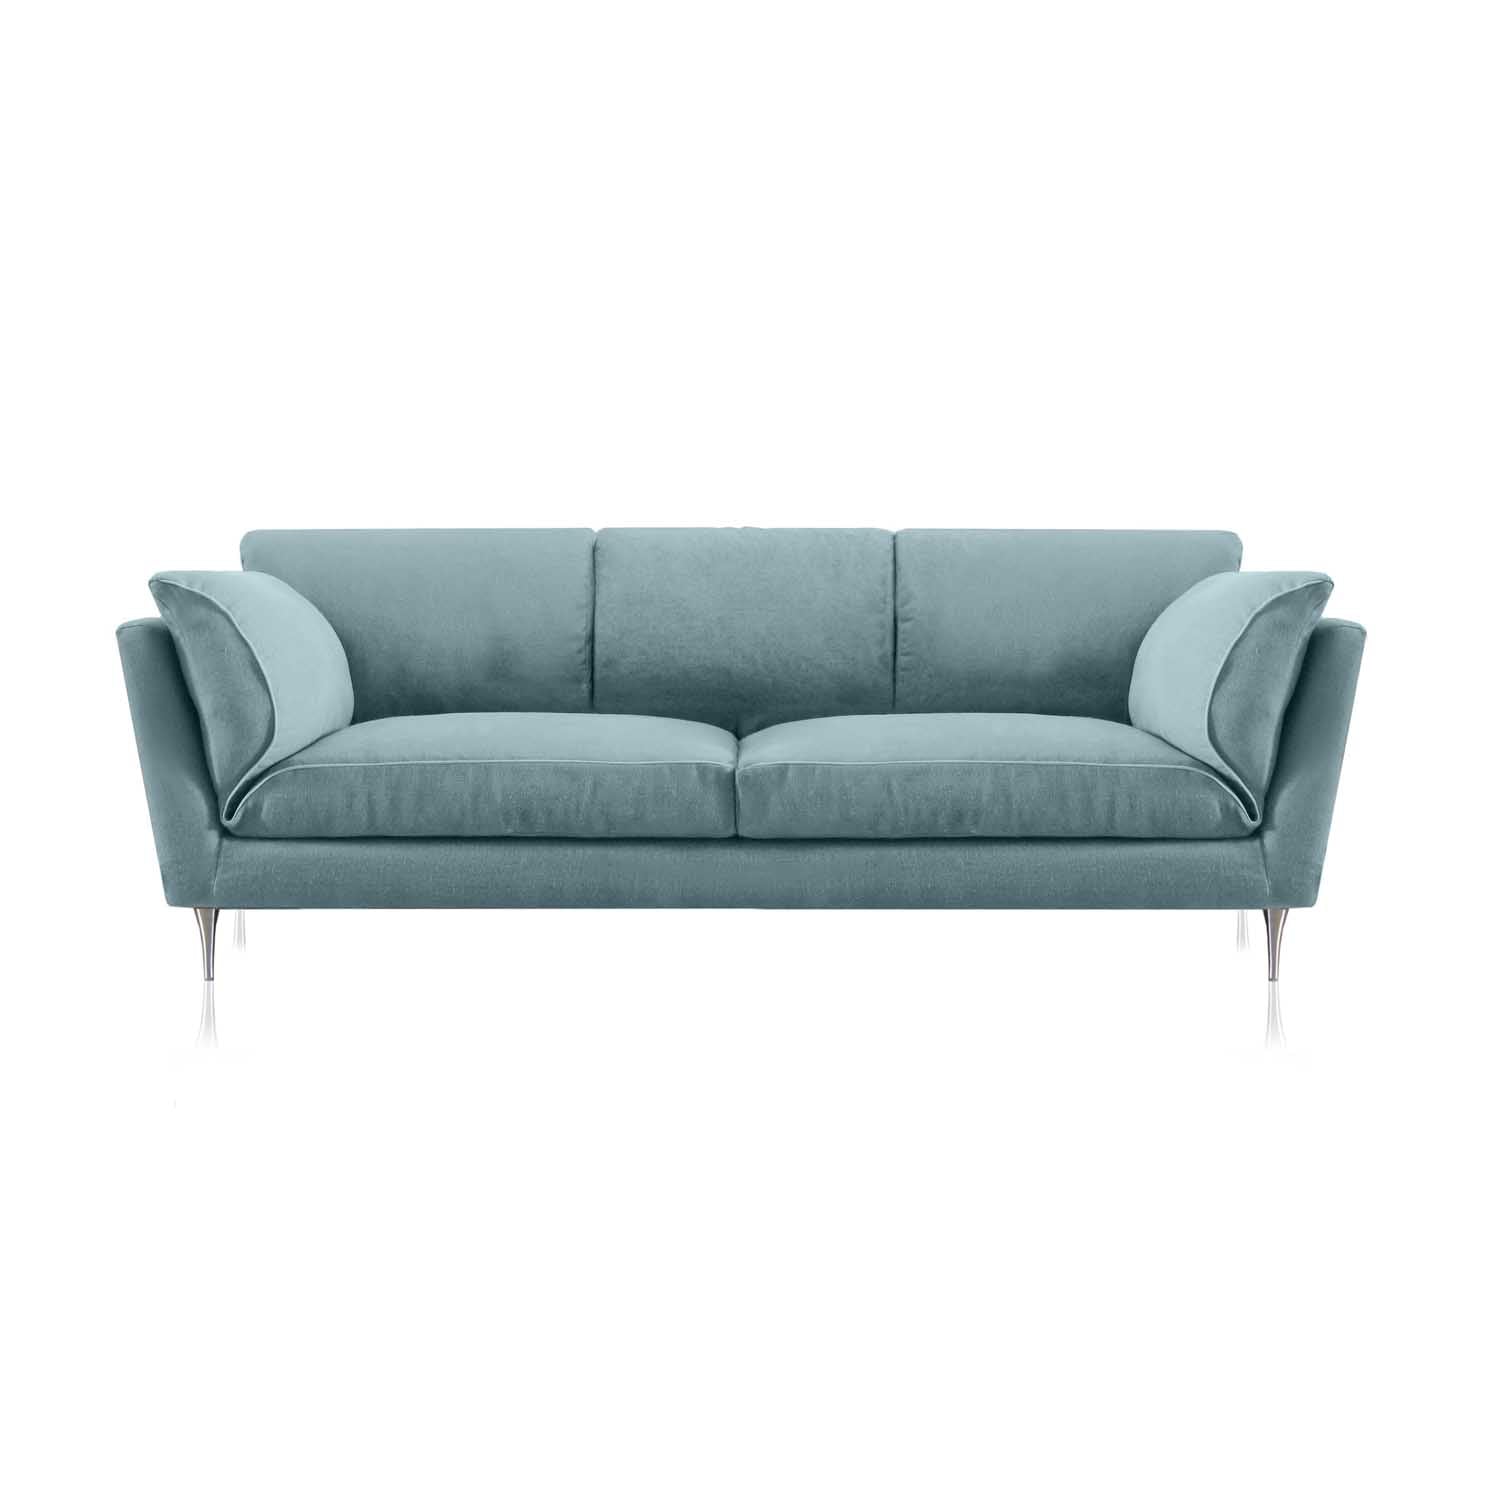 Elevate Your Seating Experience: Ultra-Soft Sofa